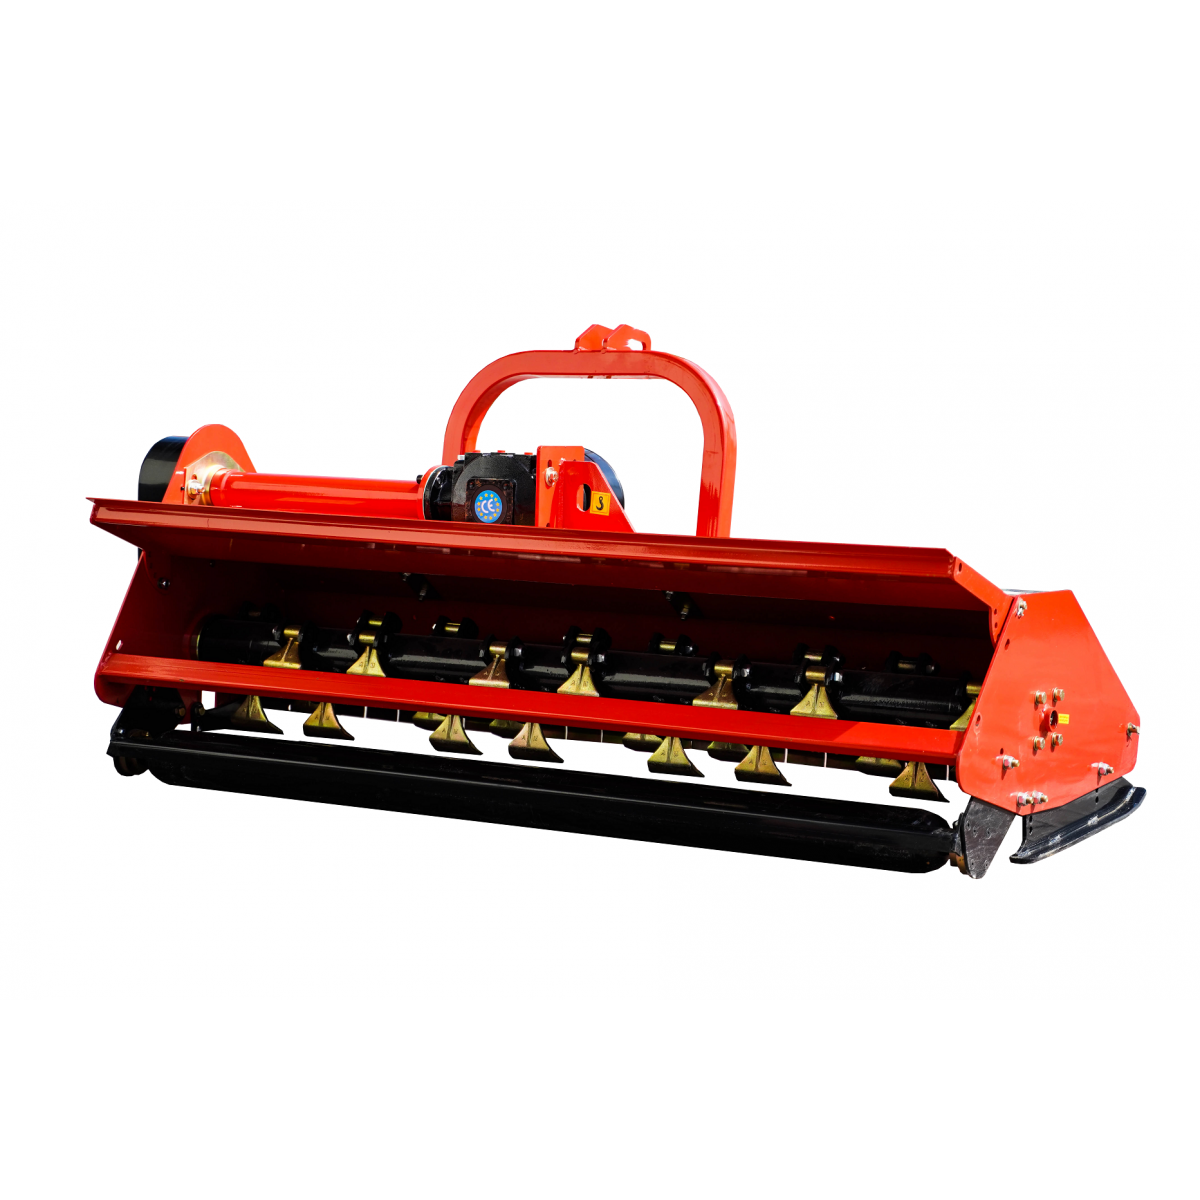 Flail mower EFGC-K 155, opening 4FARMER hatch - red